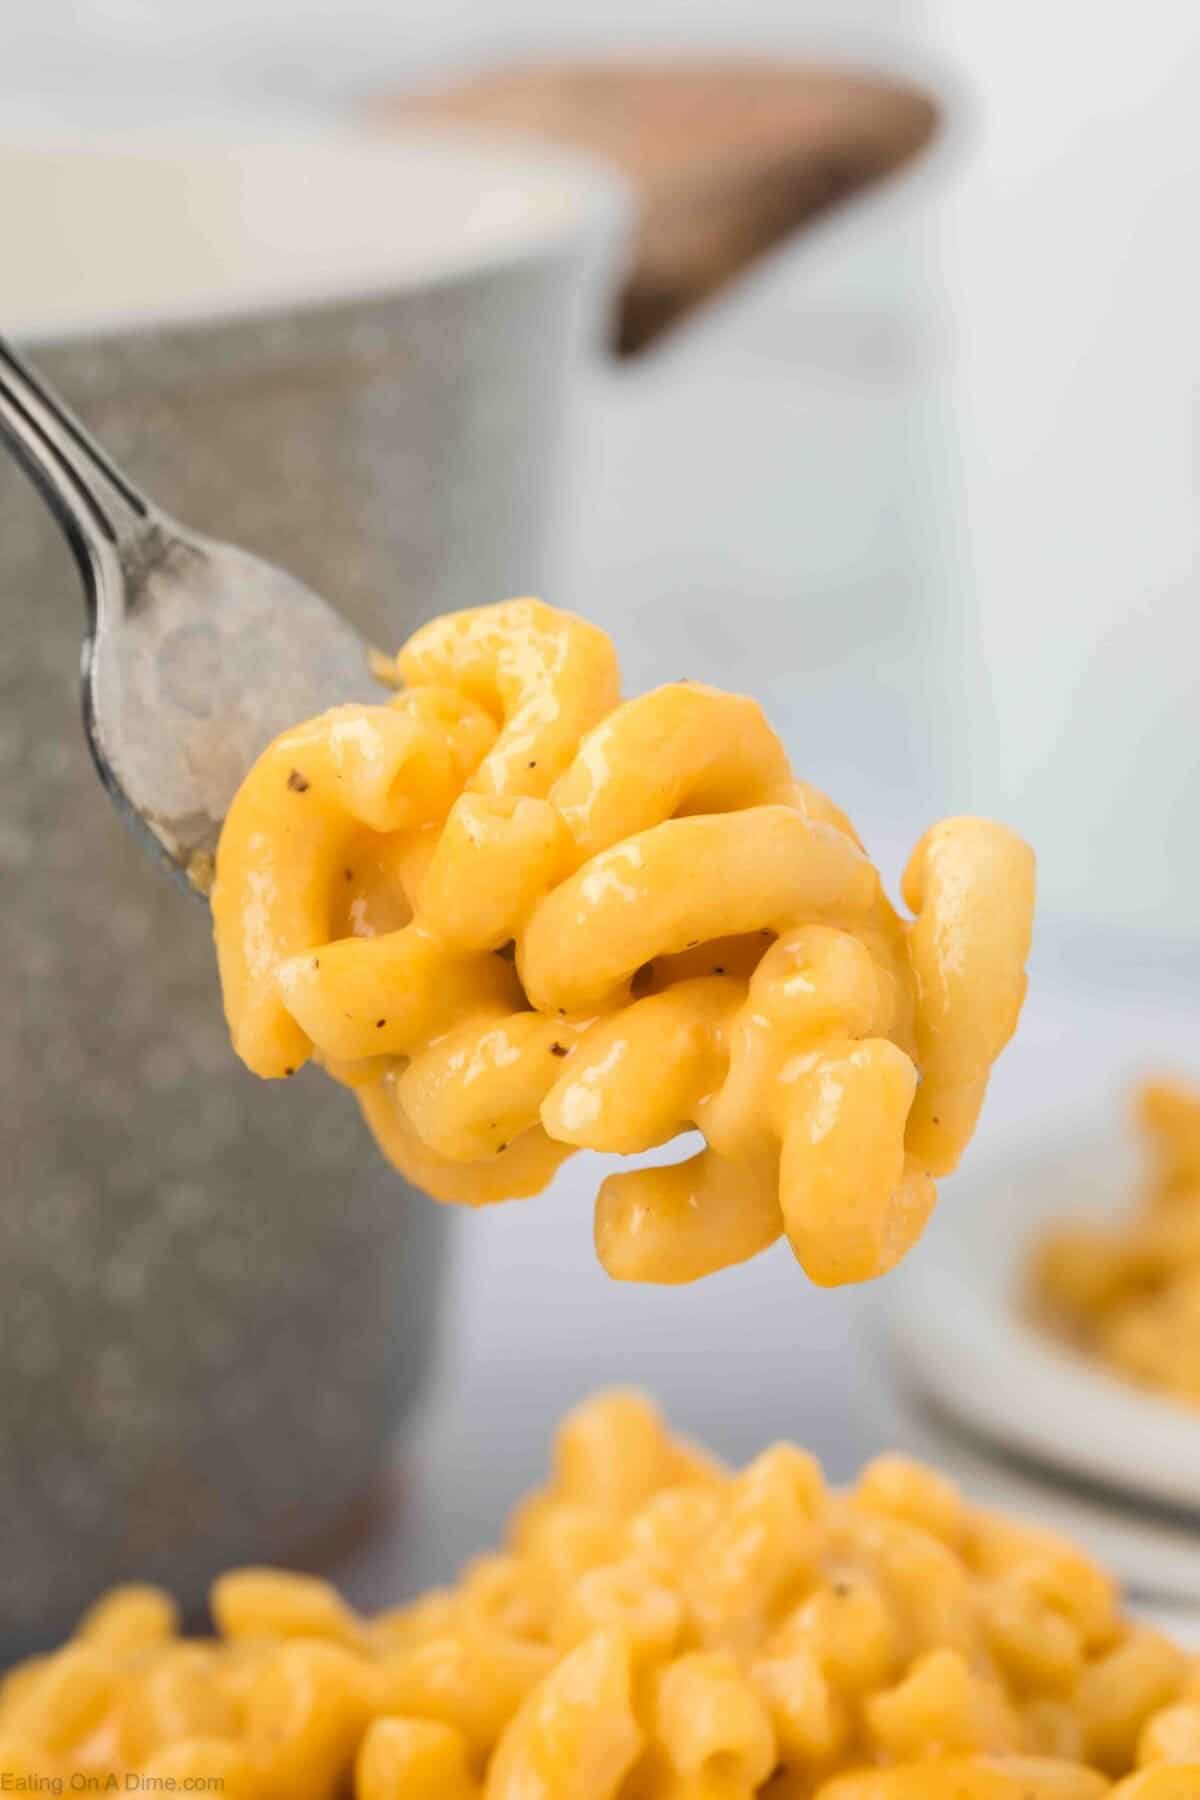 A close-up of a fork holding a bite of creamy, cheesy macaroni and cheese. The background shows a pot with more macaroni and cheese and a small plate with additional servings. The pasta is covered in a rich, yellow cheese sauce from an easy homemade macaroni and cheese recipe.